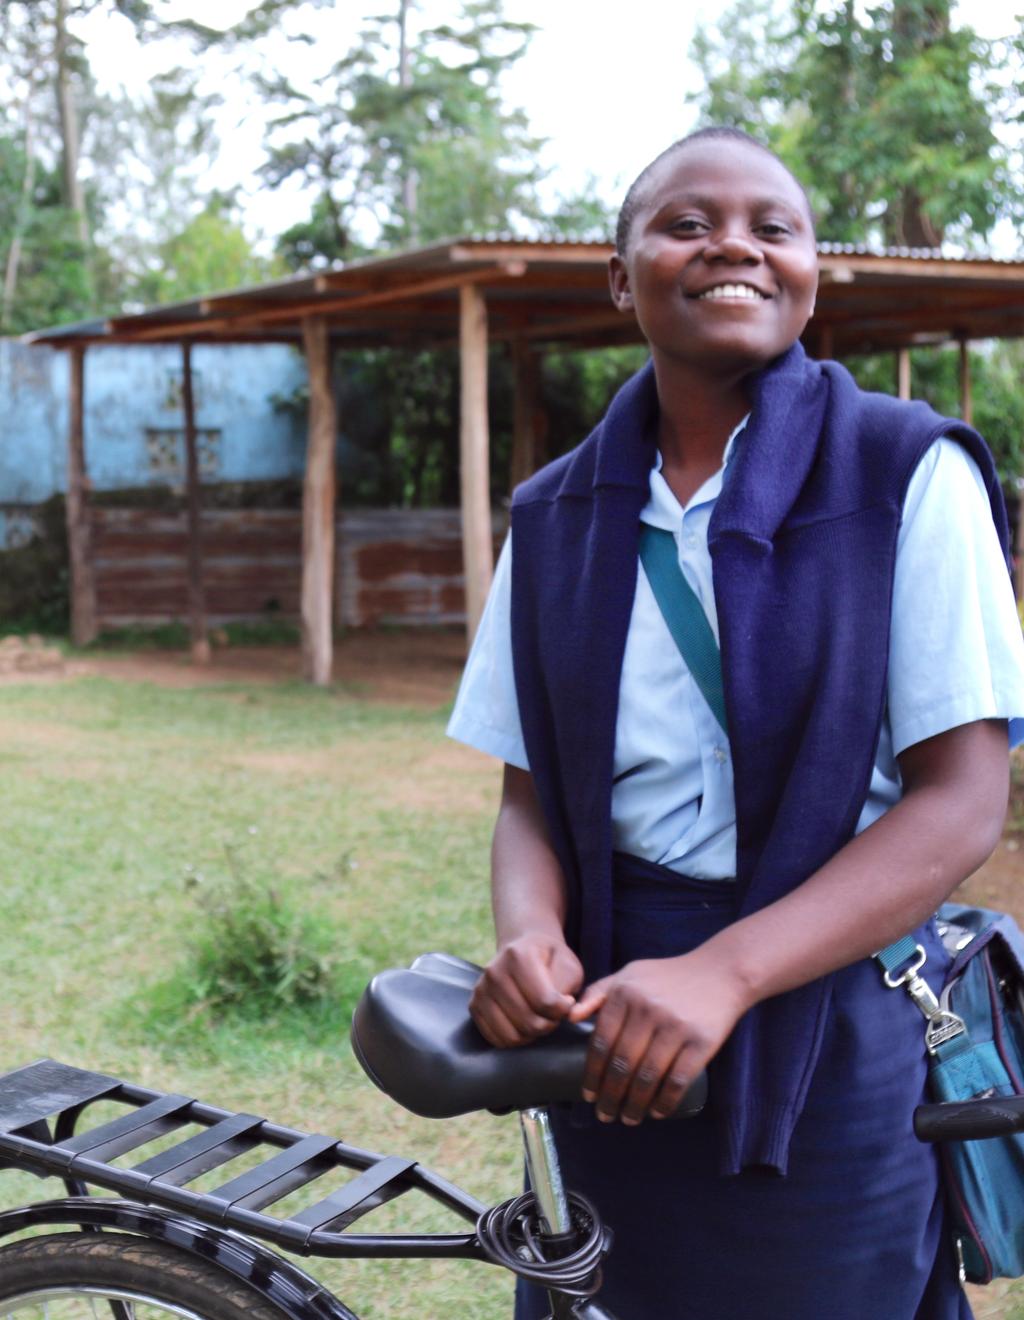 WORLD BICYCLE RELIEF WHY BICYCLES FOR EDUCATION? EMPOWERING GIRLS WITH BICYCLES IN KENYA There are more than 10 million school-age children in Kenya.